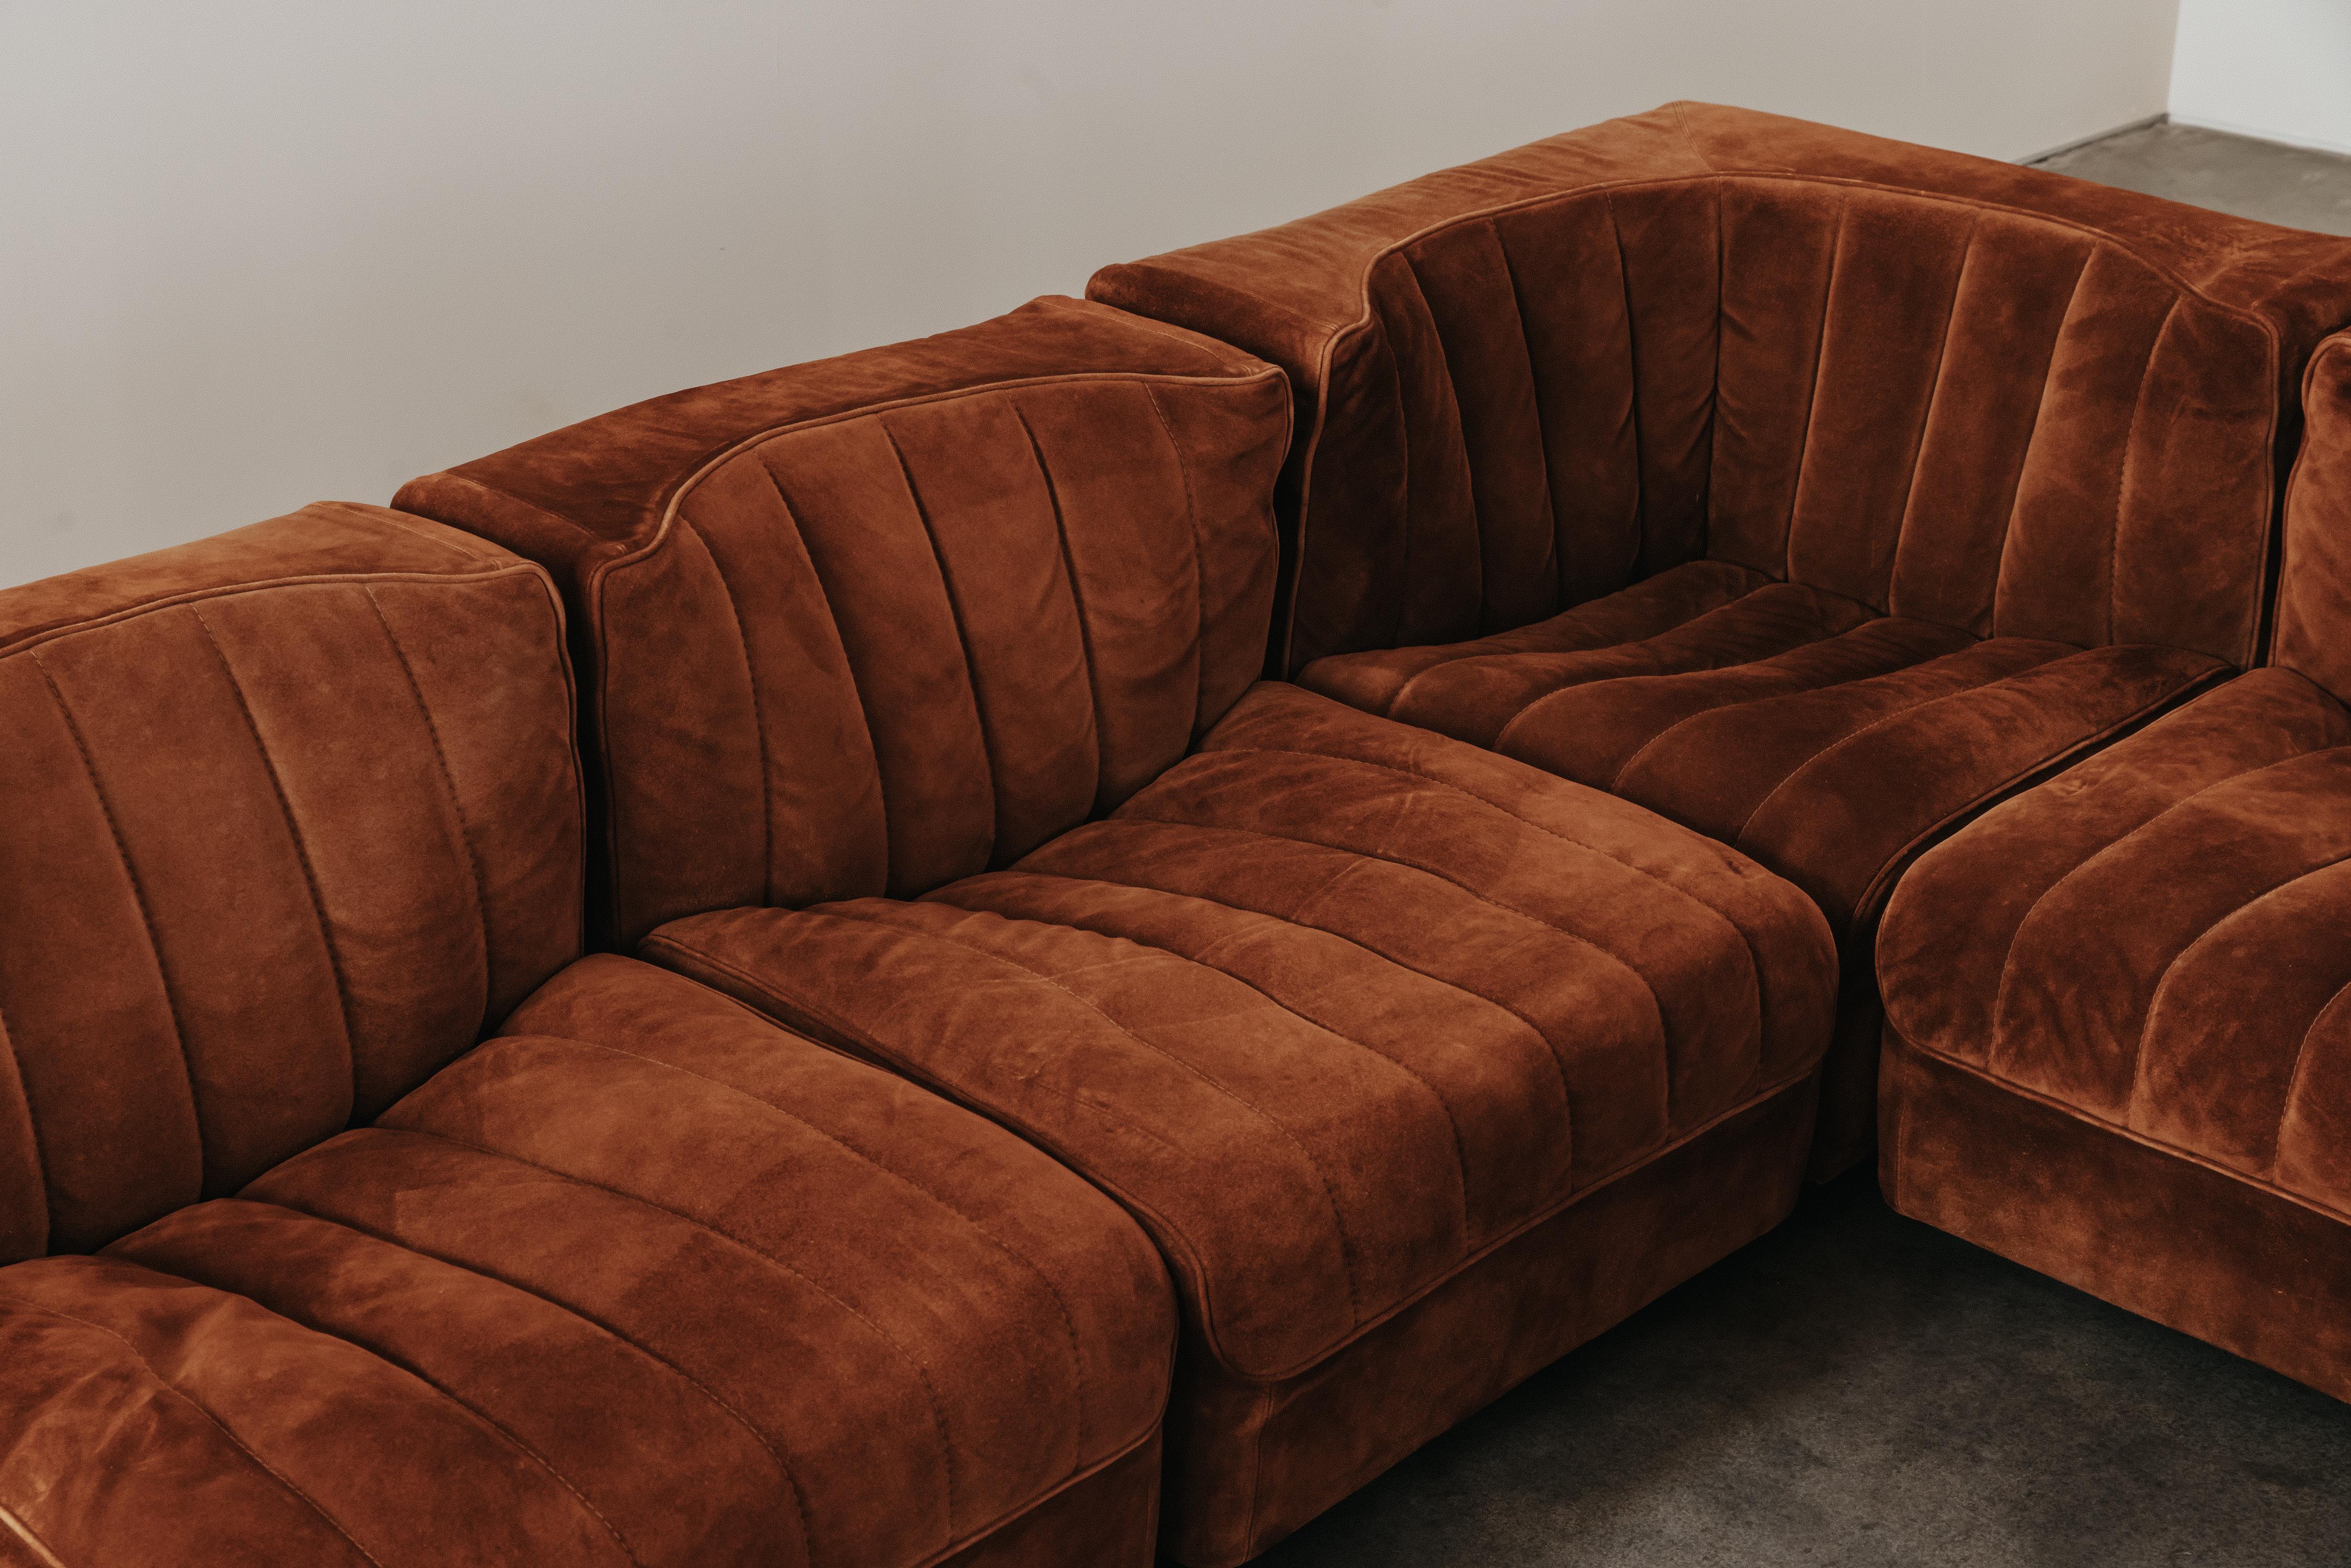 Vintage Tito Agnoli Suede Leather Modular Sofa by Arflex, 1968.  Original copper colored suede leather upholstery with superb patina.
